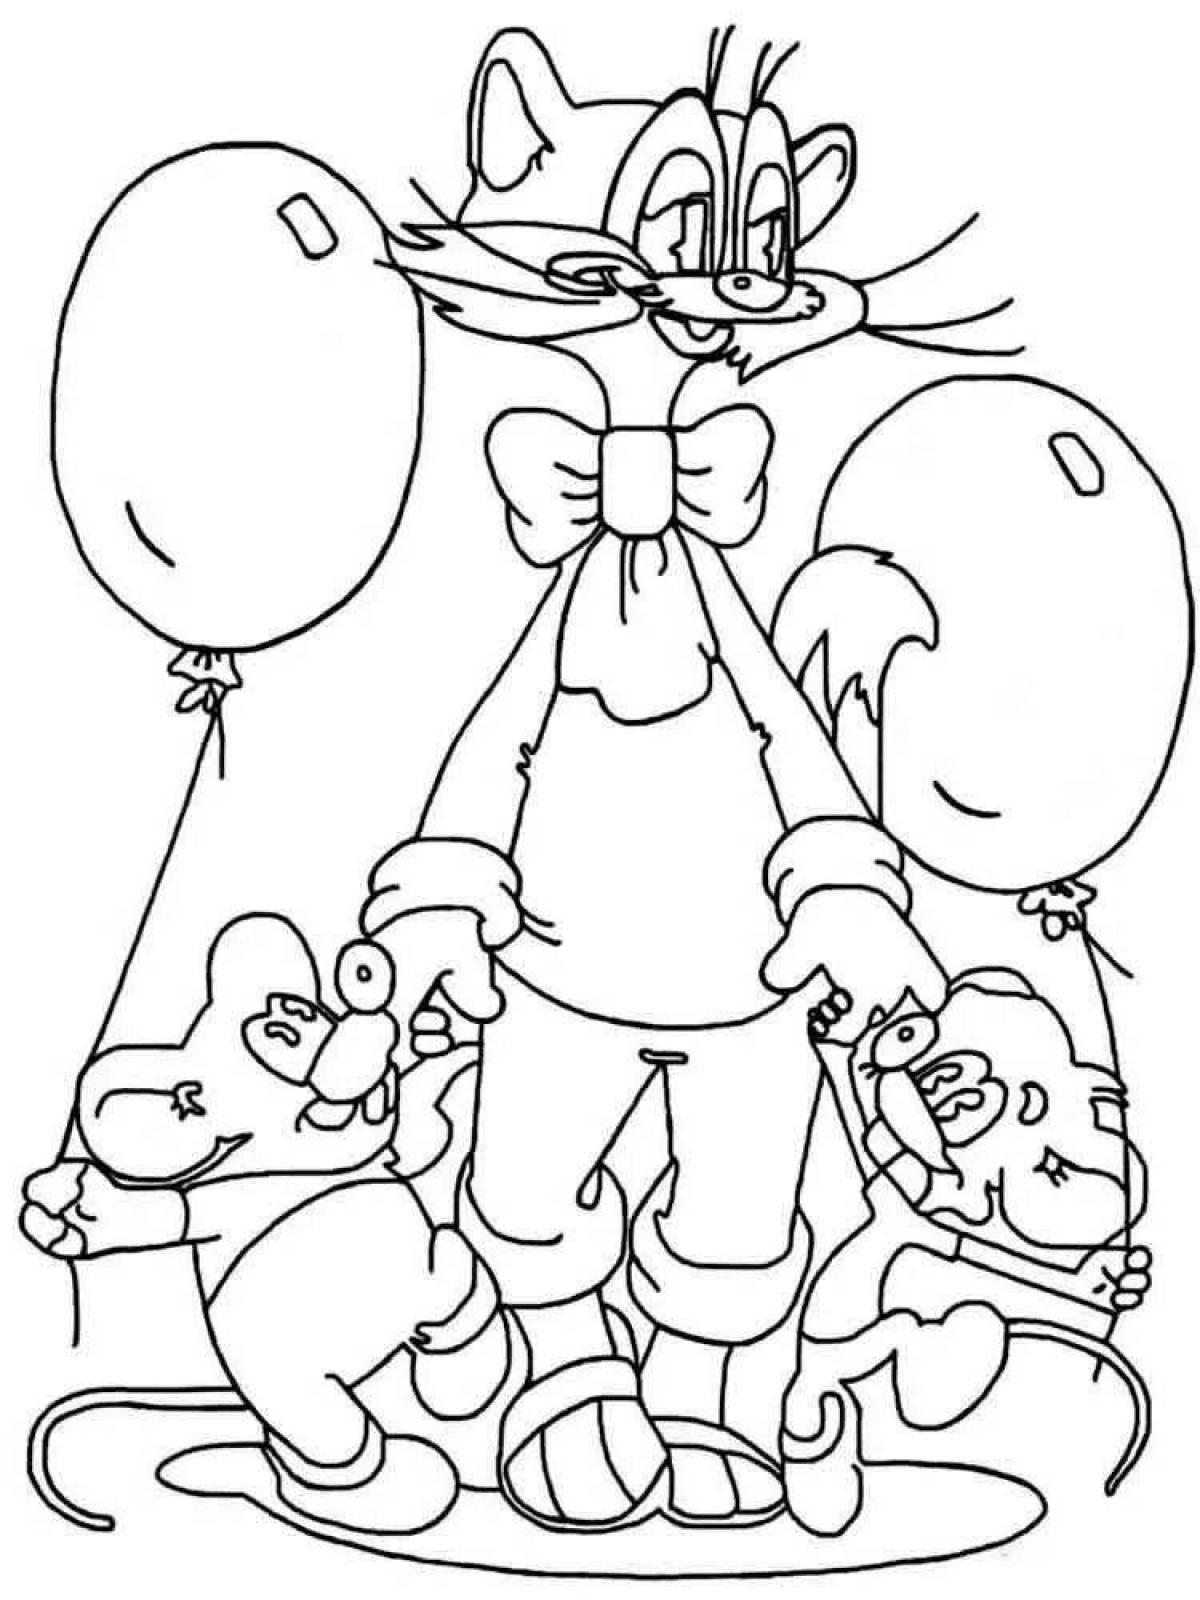 Adorable leopold cat coloring page